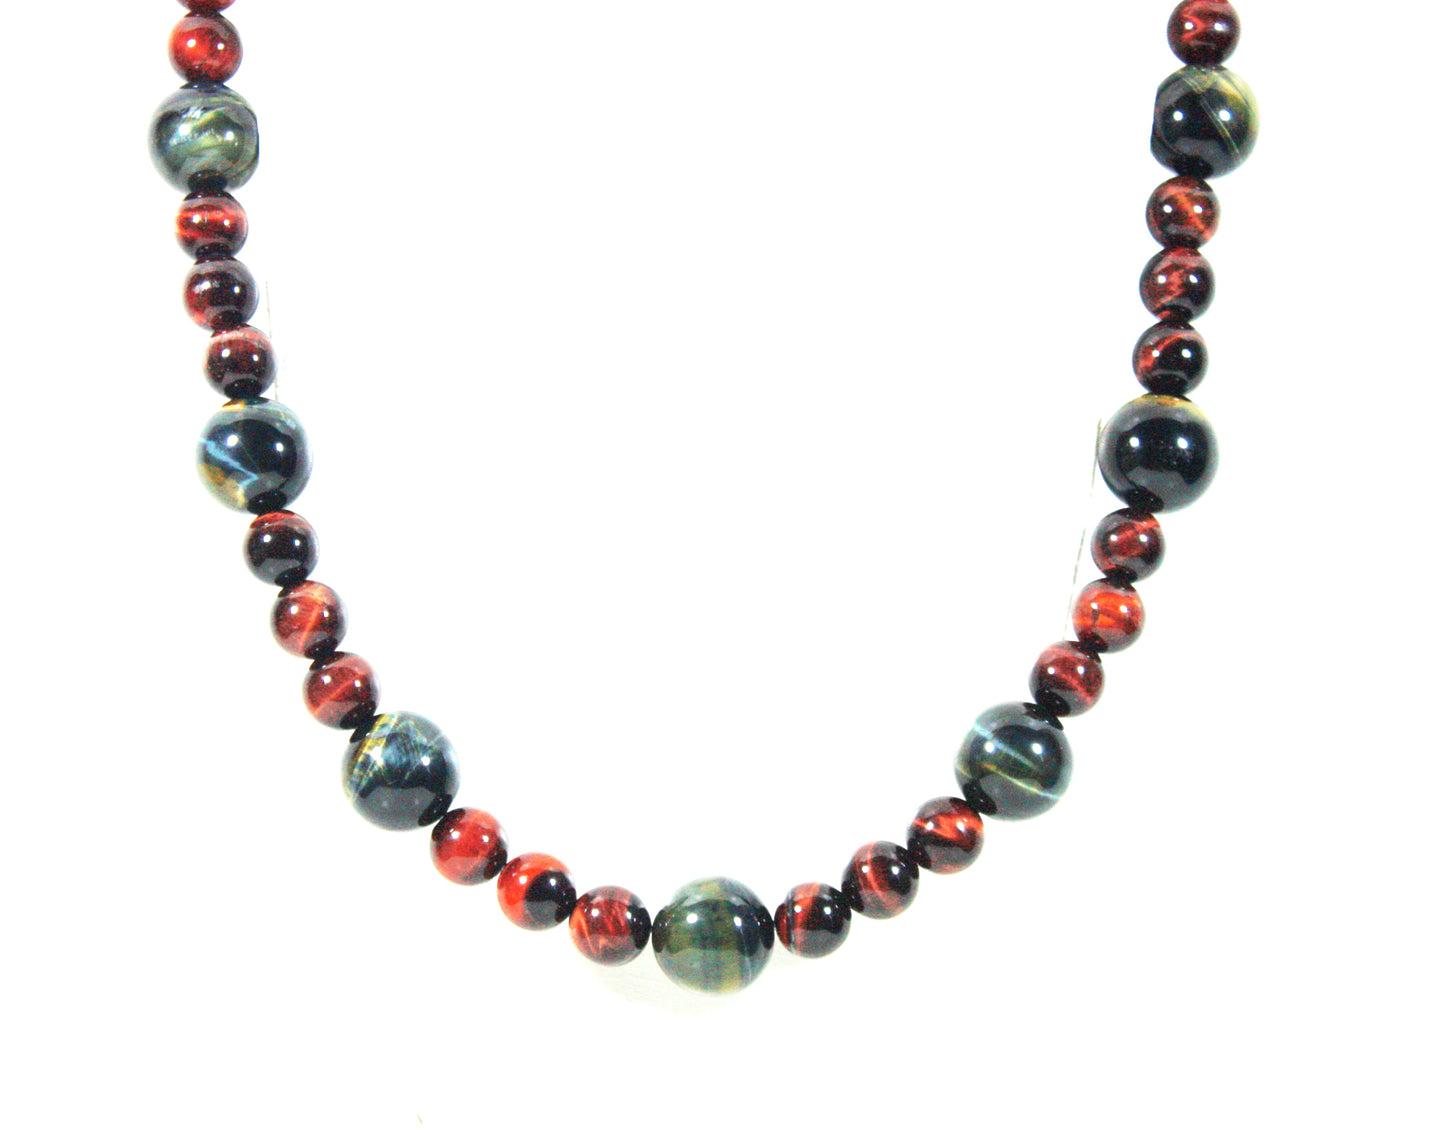 Blue Tigers Eye Necklace and Red Tigers Eye Necklace - Magnetic Clasp Necklace